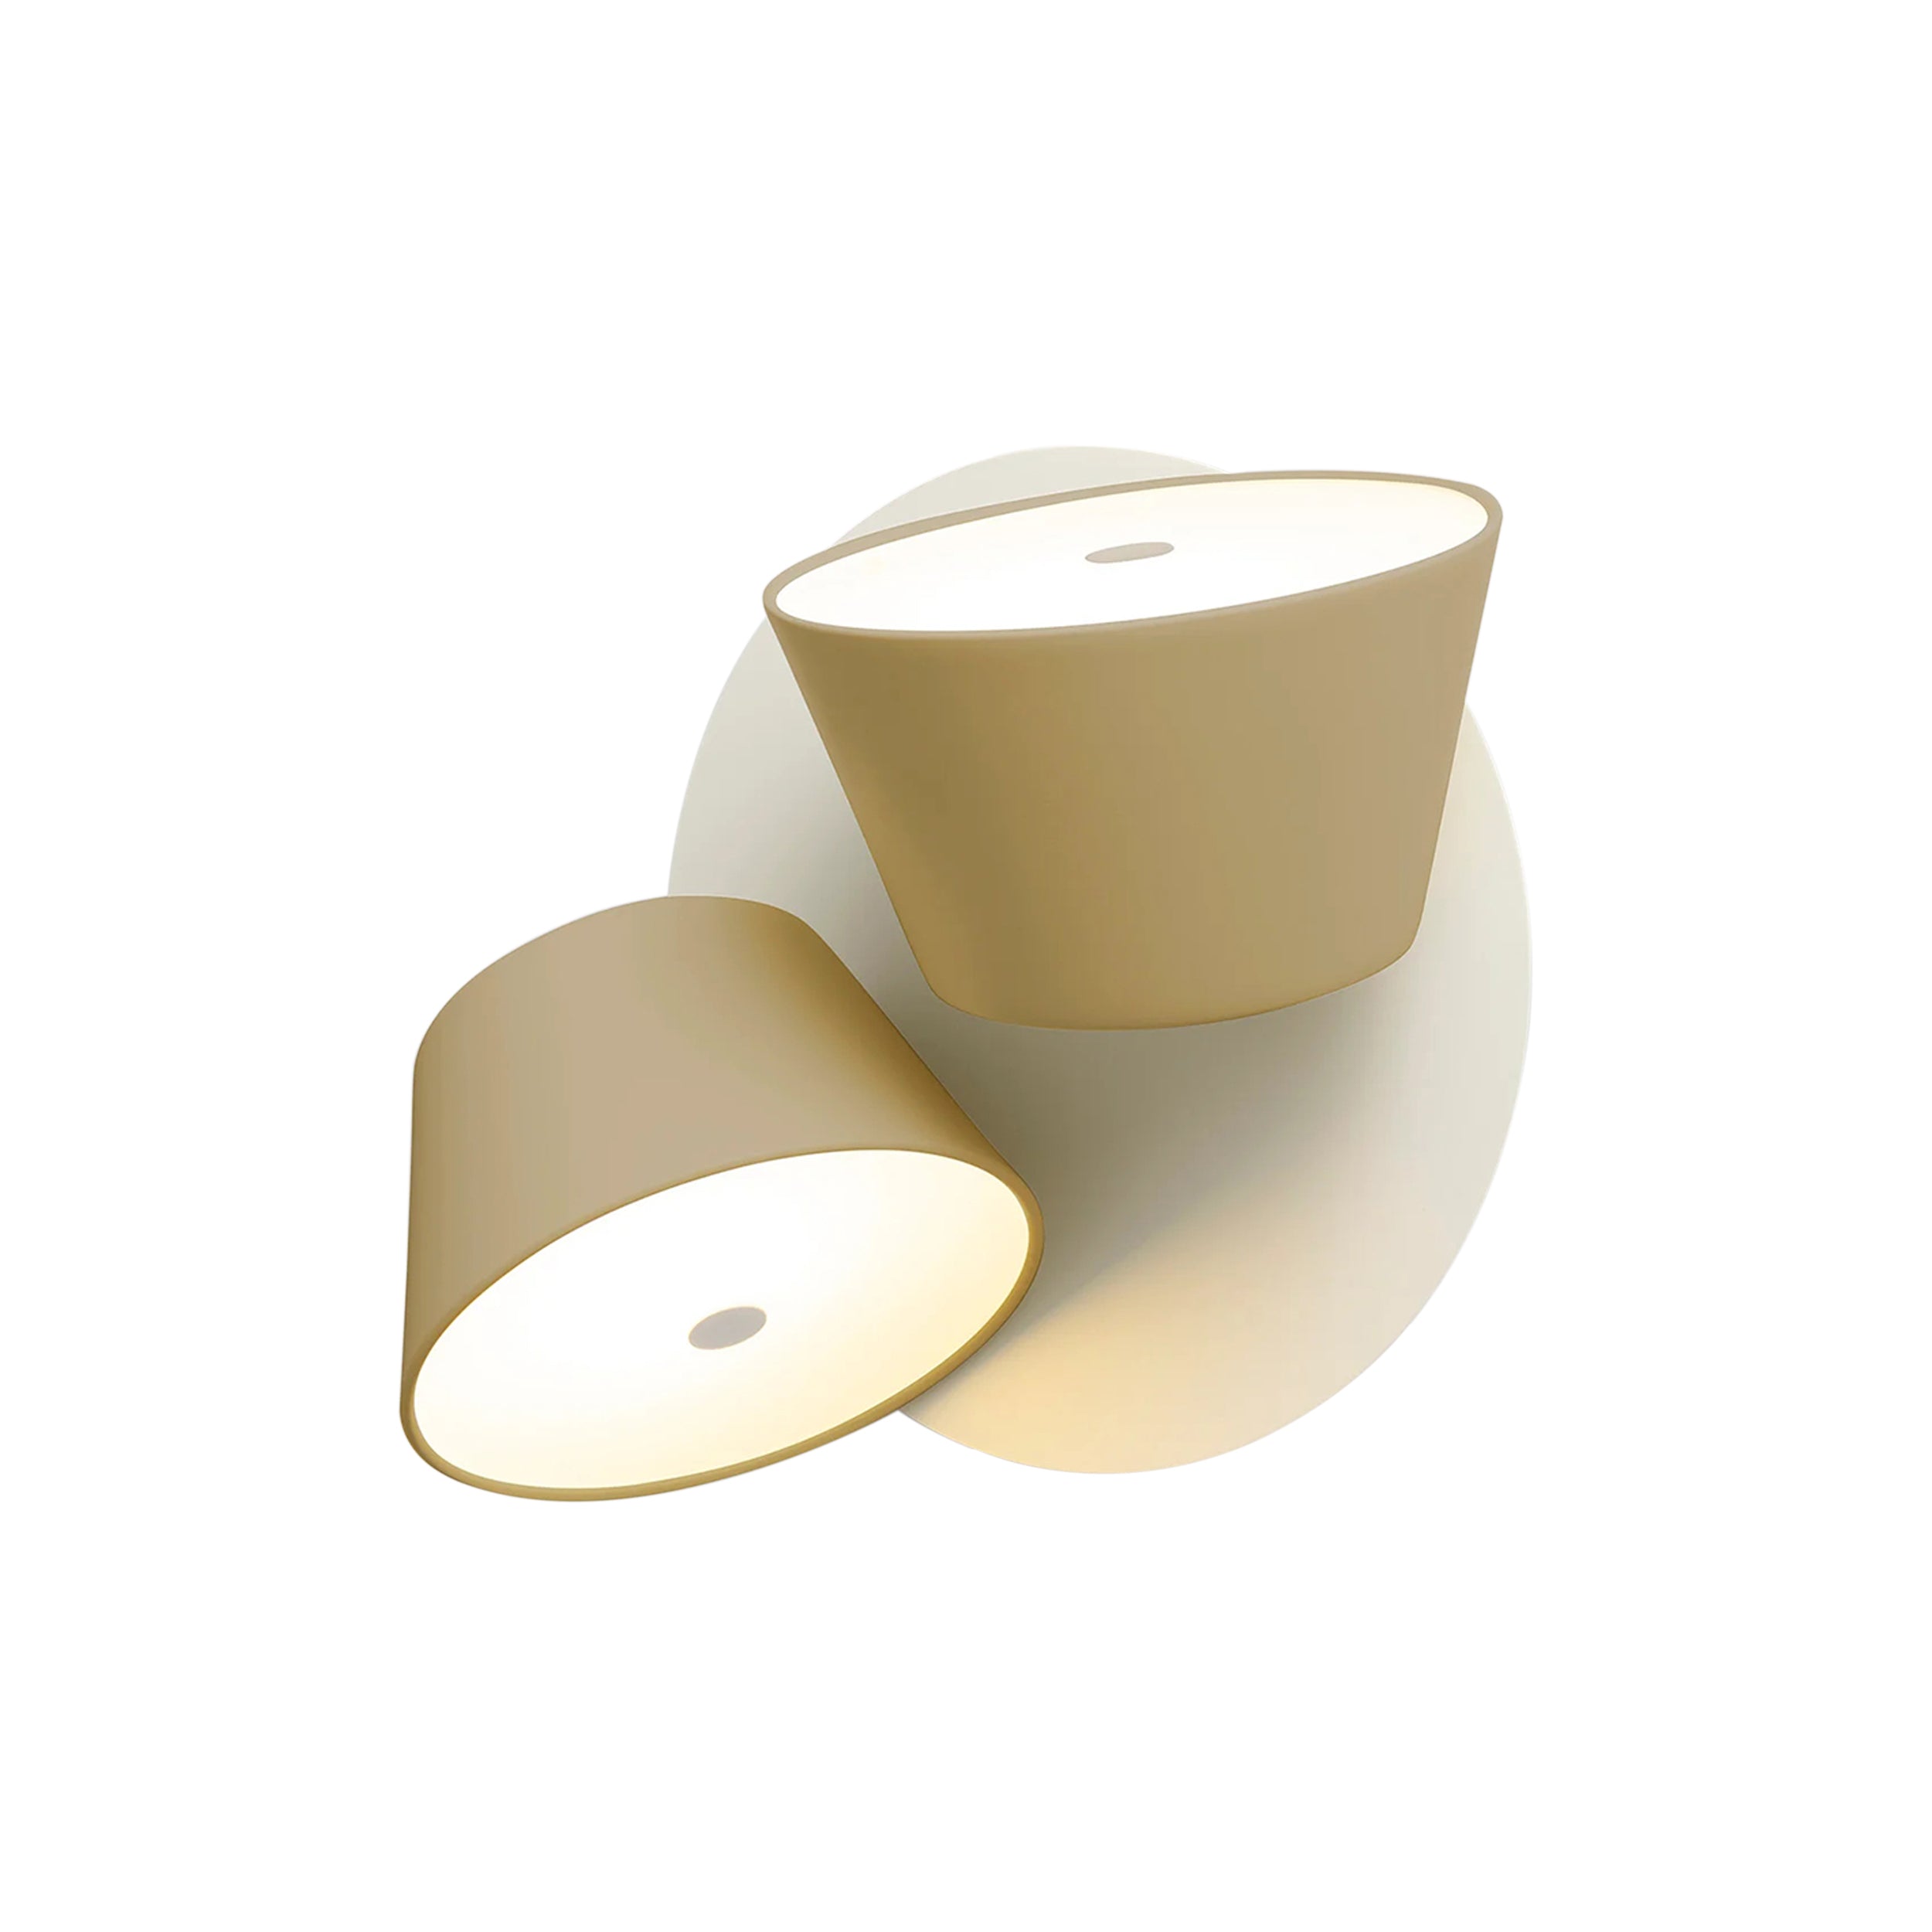 Tam Tam A2 Wall Light: Olive Yellow